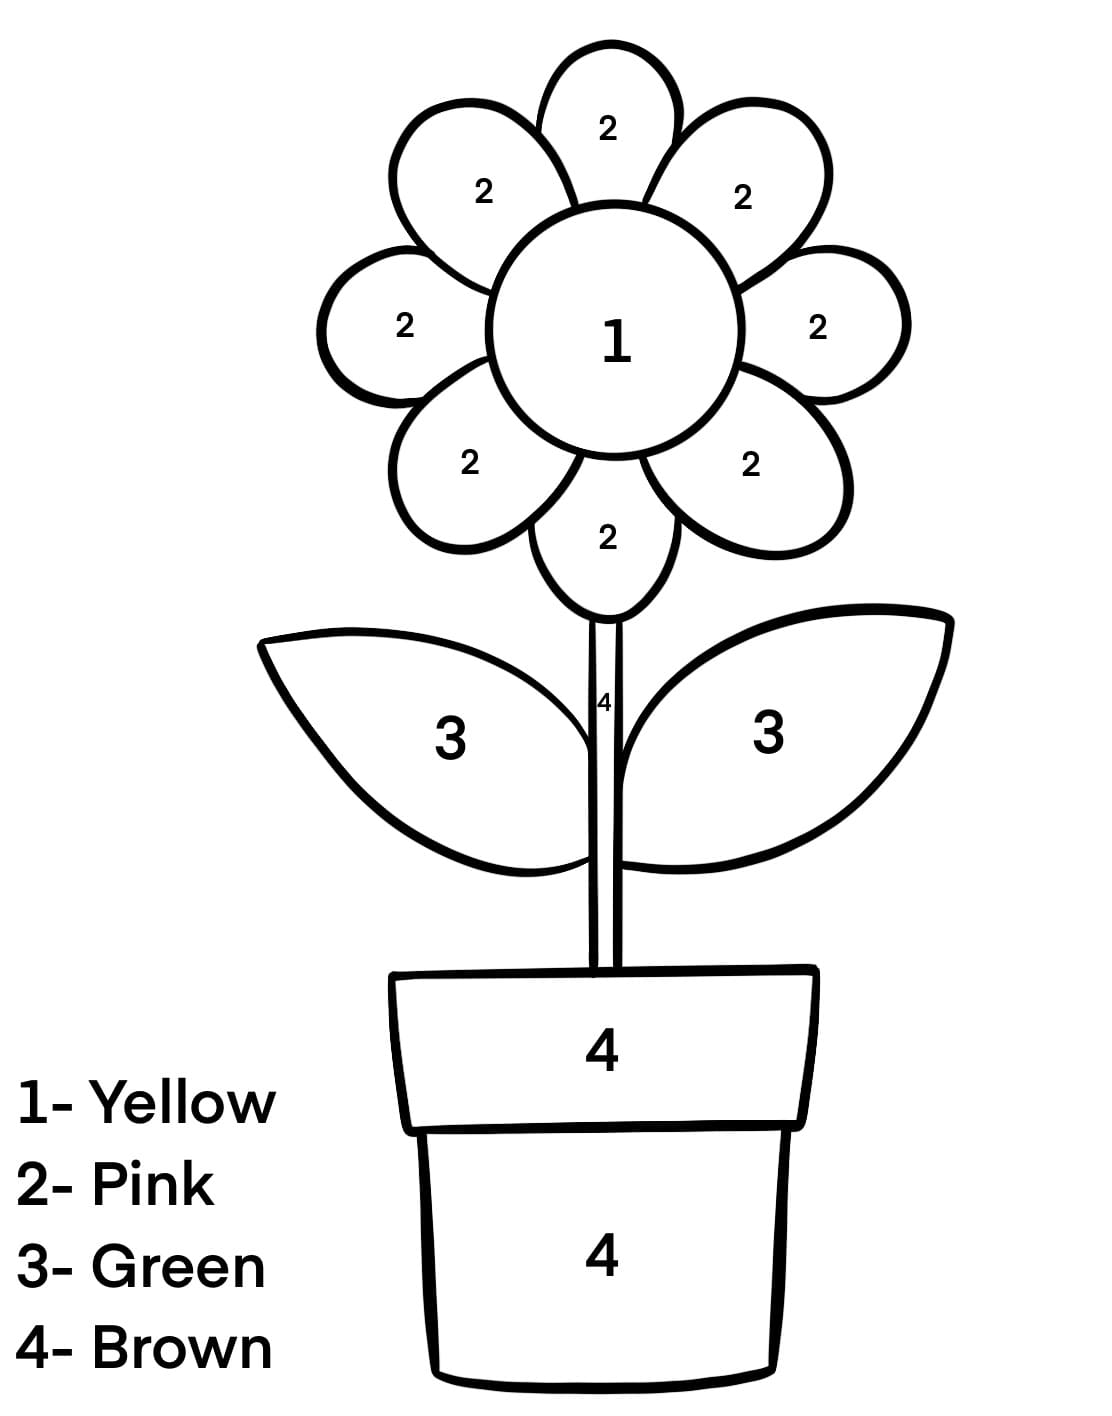 Flower Pot Coloring Pages - Free Printable Coloring Pages for Kids